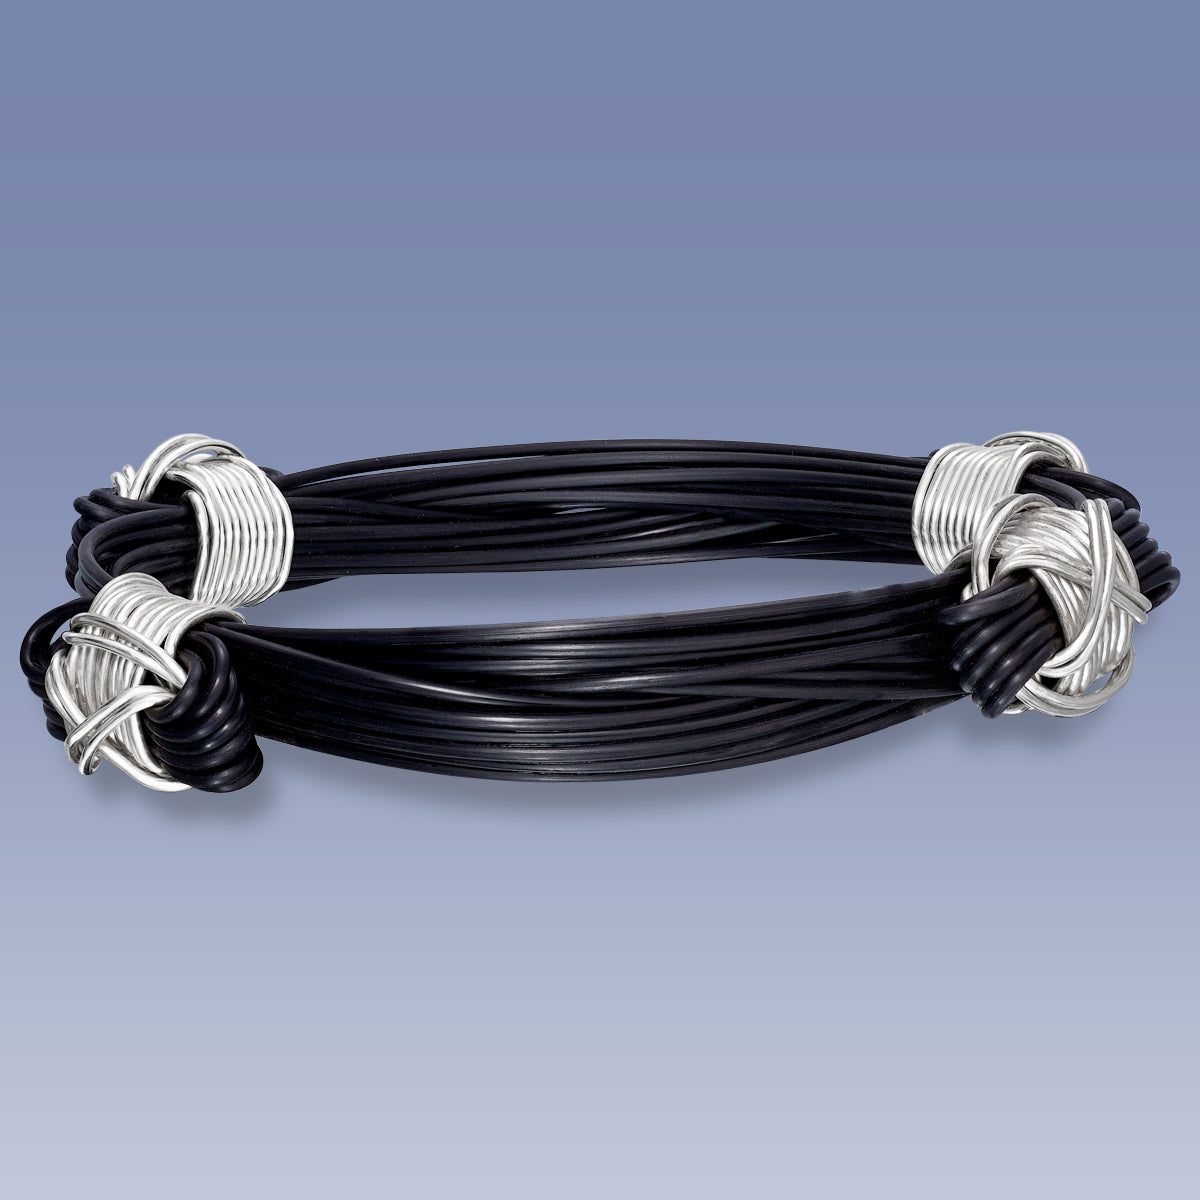 Elephant Hair Bracelet with Sterling Silver – Nature Art Gallery Thailand  Jewelry